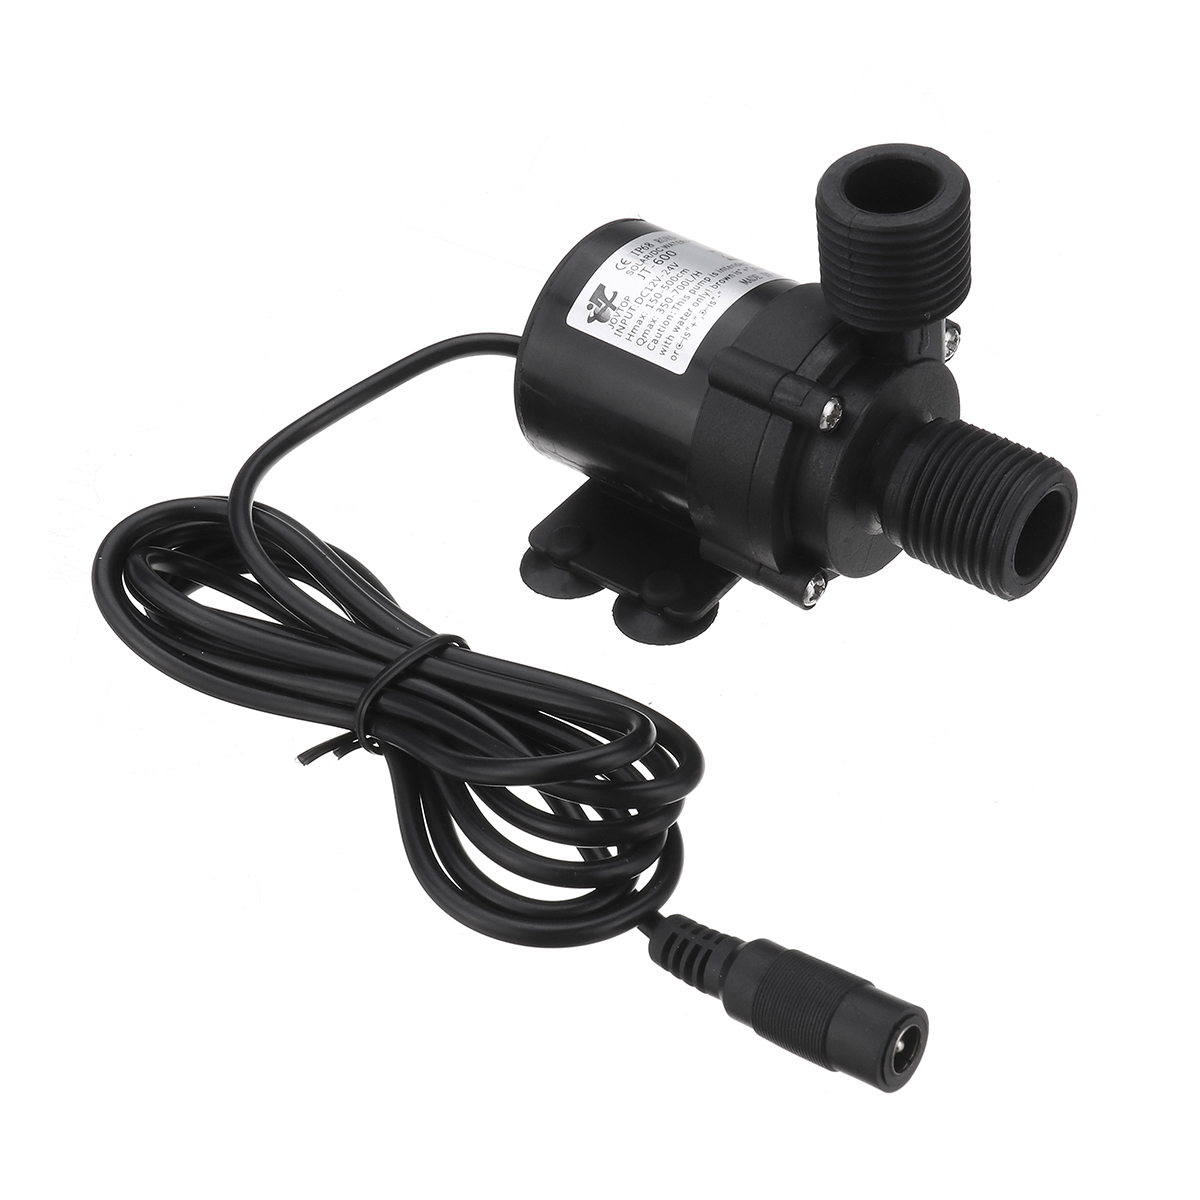 24V12V-Hot-Water-Pump-for-Circulating-Micro-DC-Water-Pump-With-12-Inch-Threaded-Multifunction-Brushl-1435180-2